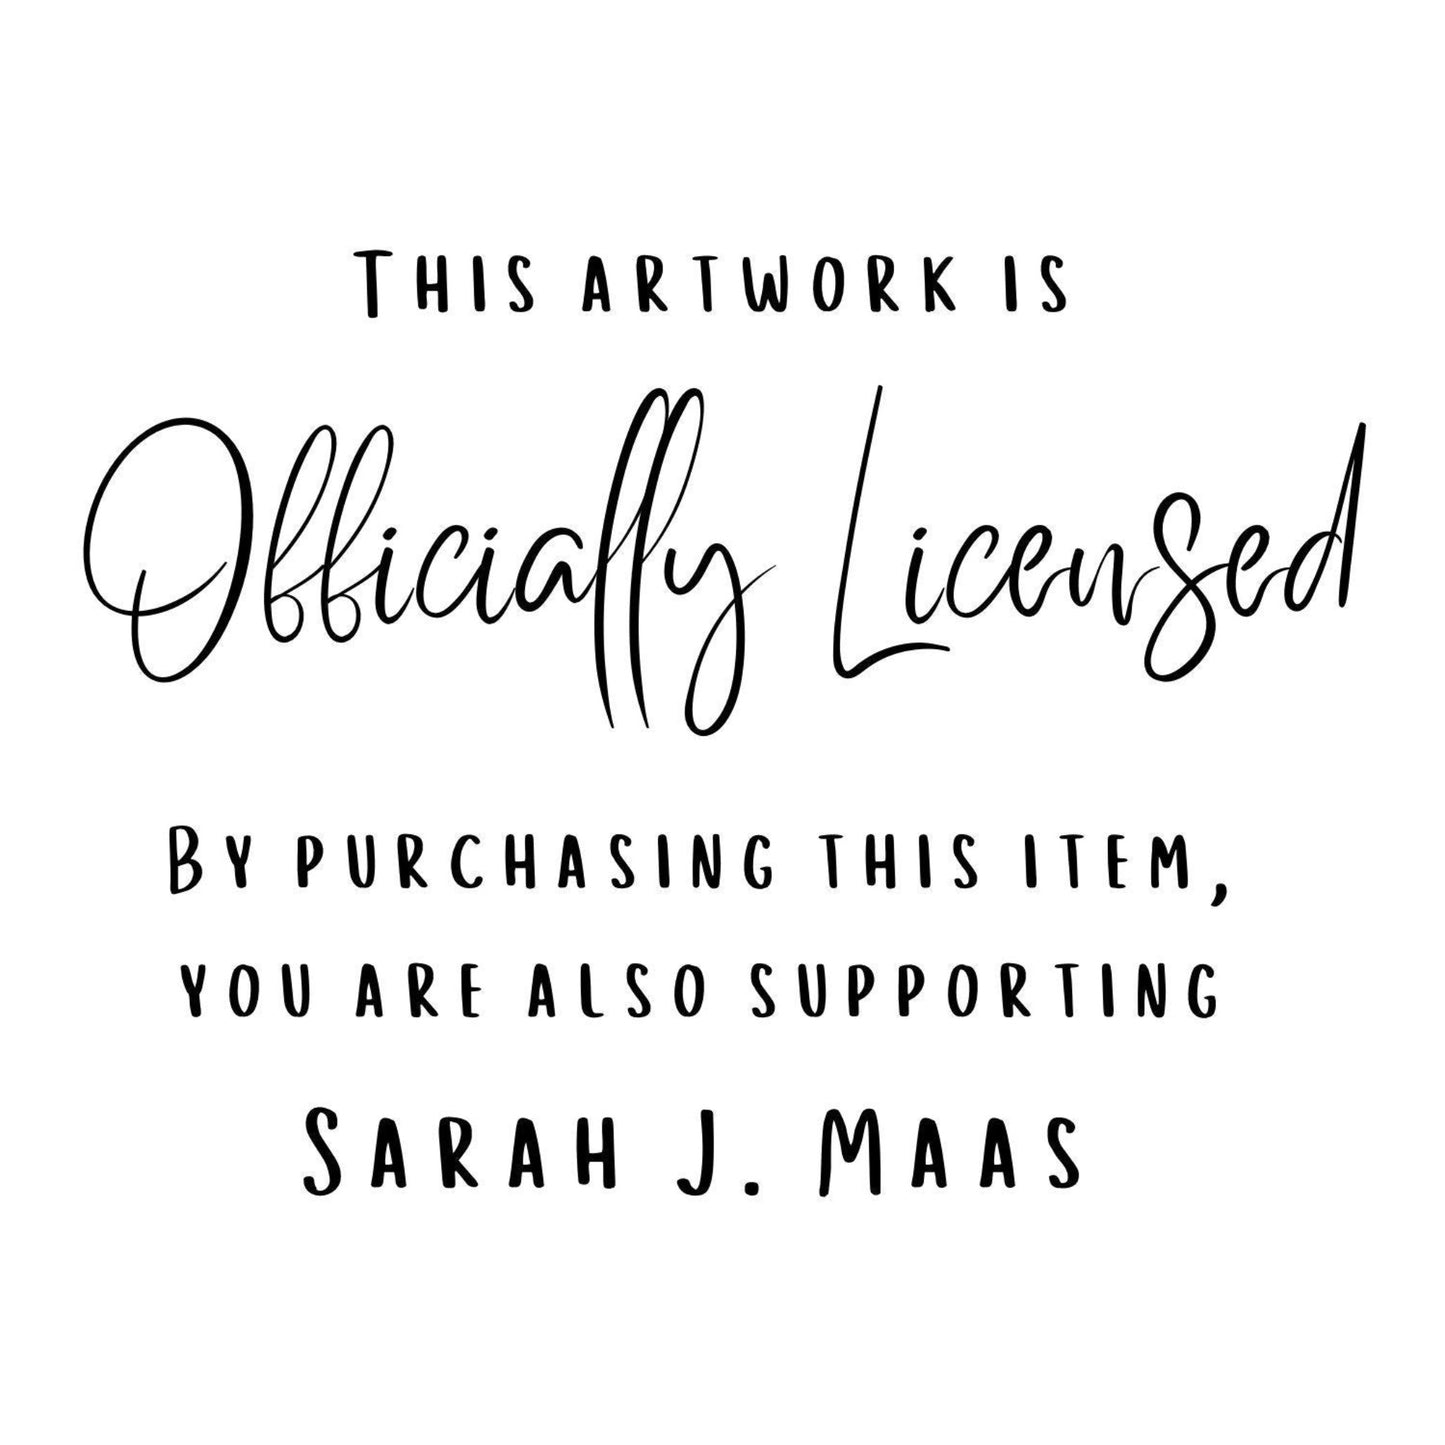 Throne of glass to whatever end print - officially licensed by Sarah J Maas